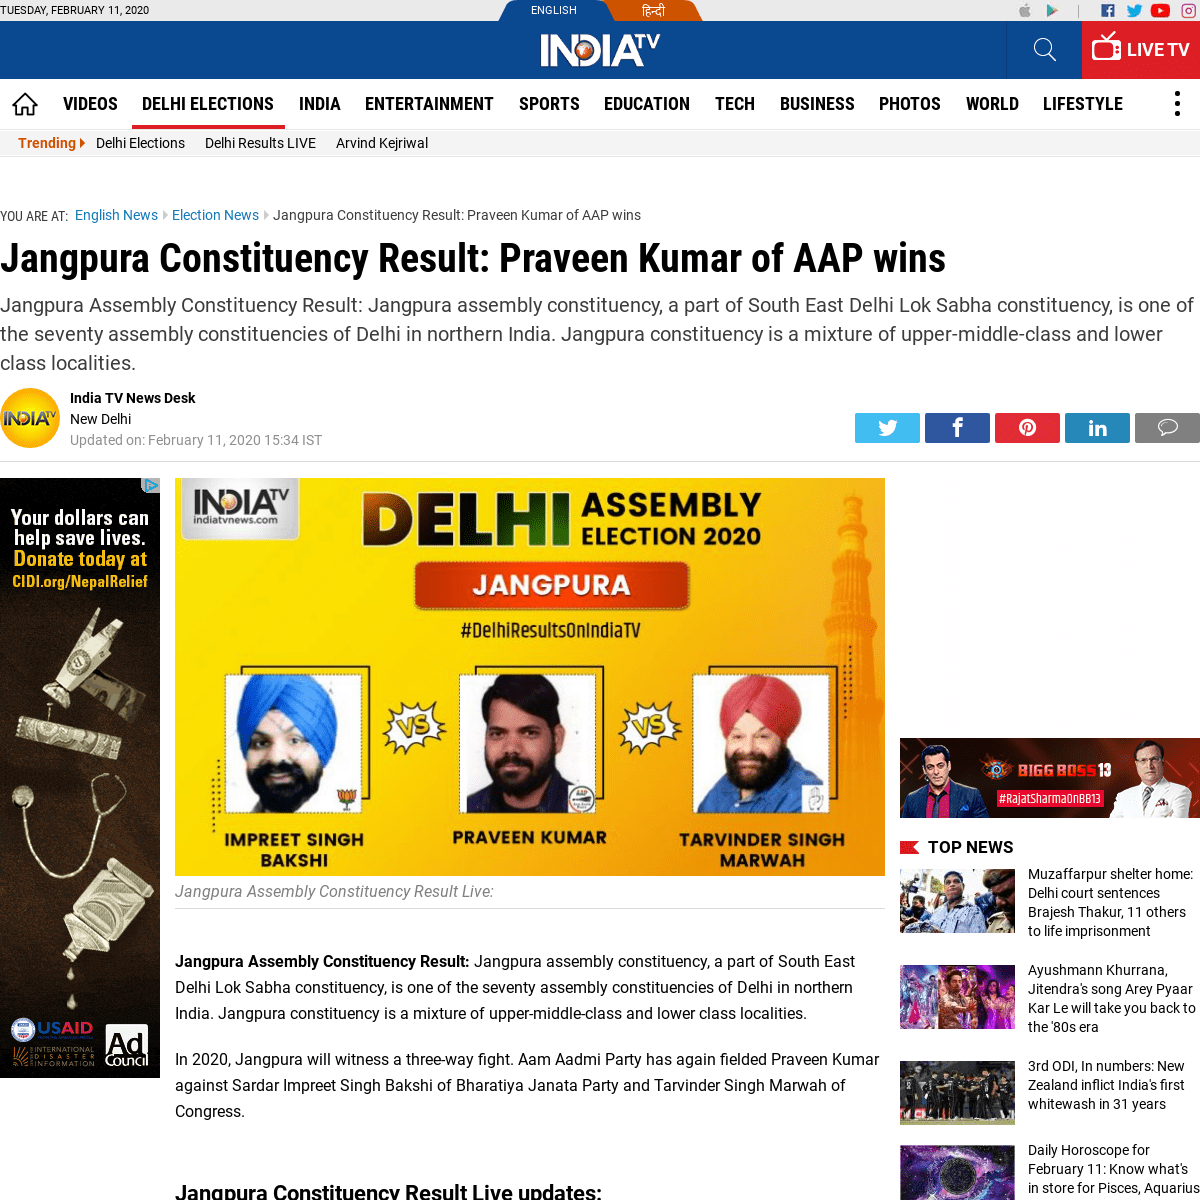 A complete backup of www.indiatvnews.com/elections/news-jangpura-constituency-result-live-delhi-election-results-2020-587567